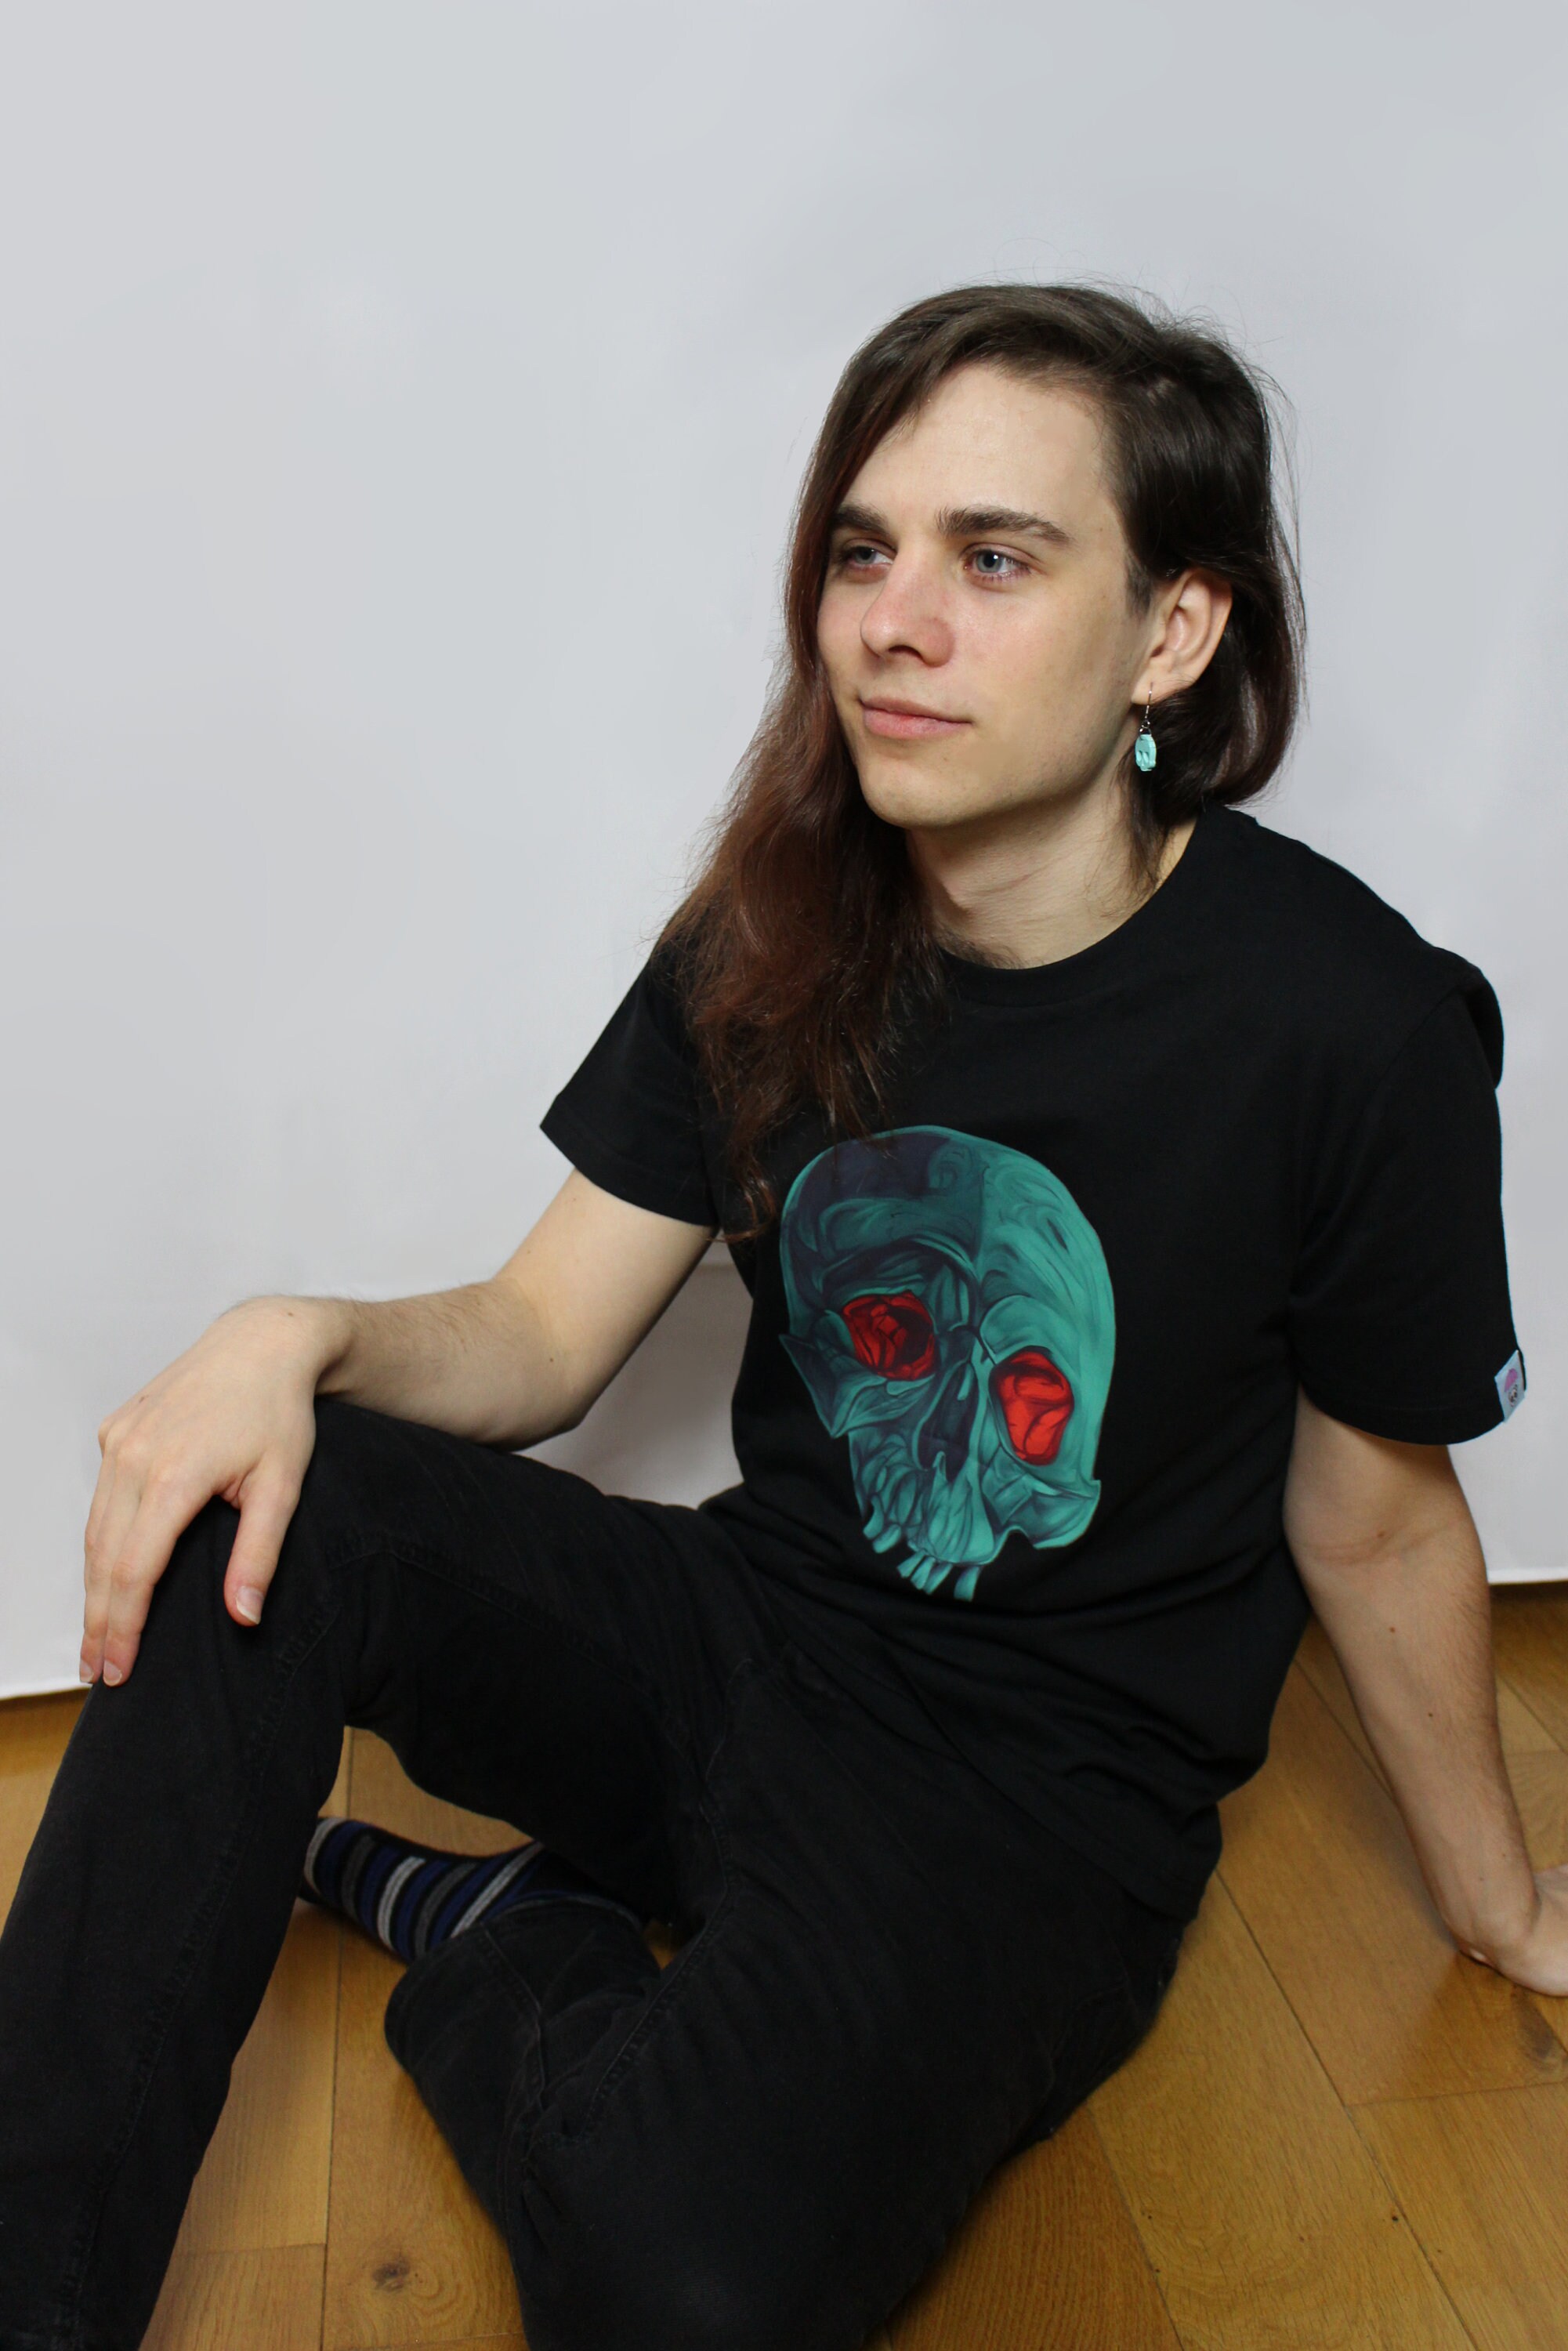 Discover Gothic Human skull t-shirts